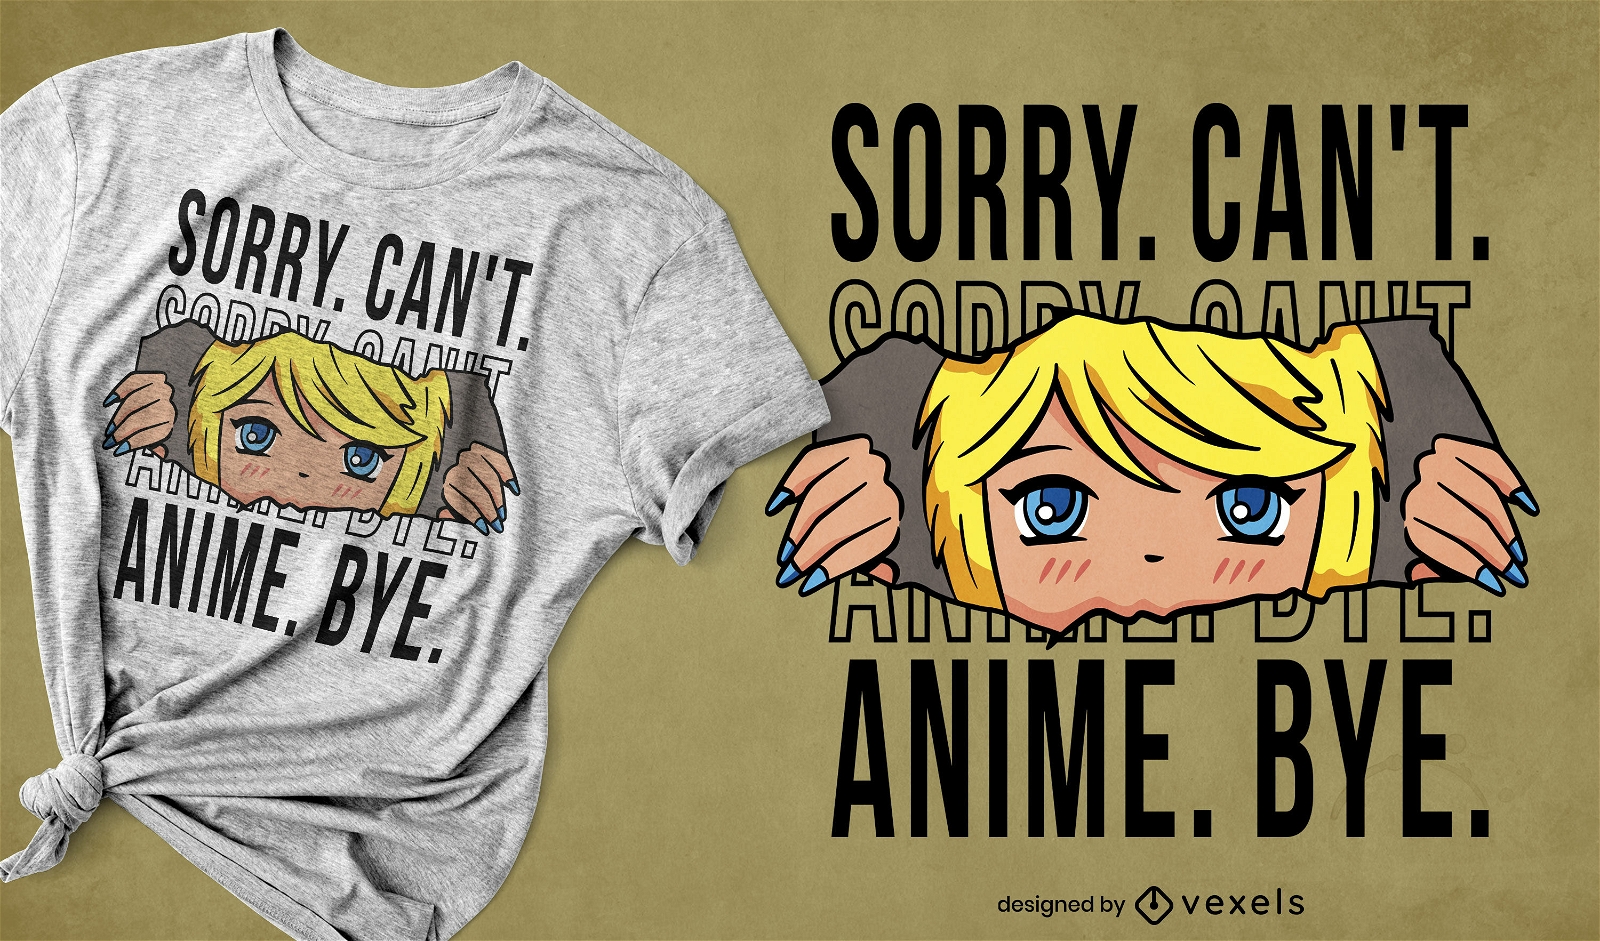 Cool anime quote t-shirt design